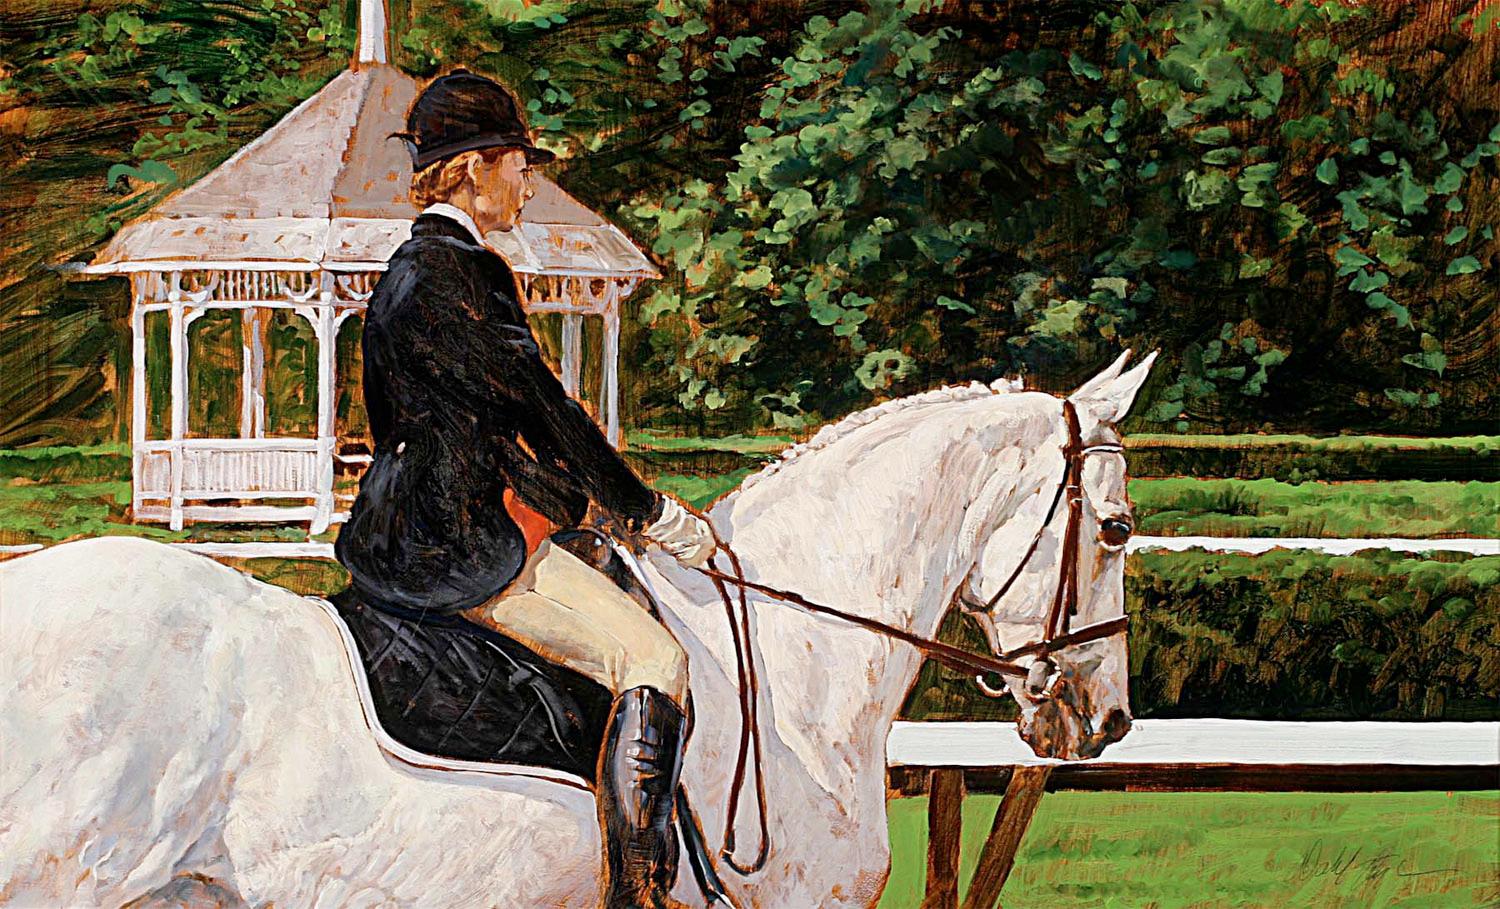 Dahl Taylor, "Dressage" Horse and Rider Equine Oil Painting on Canvas, 22x36